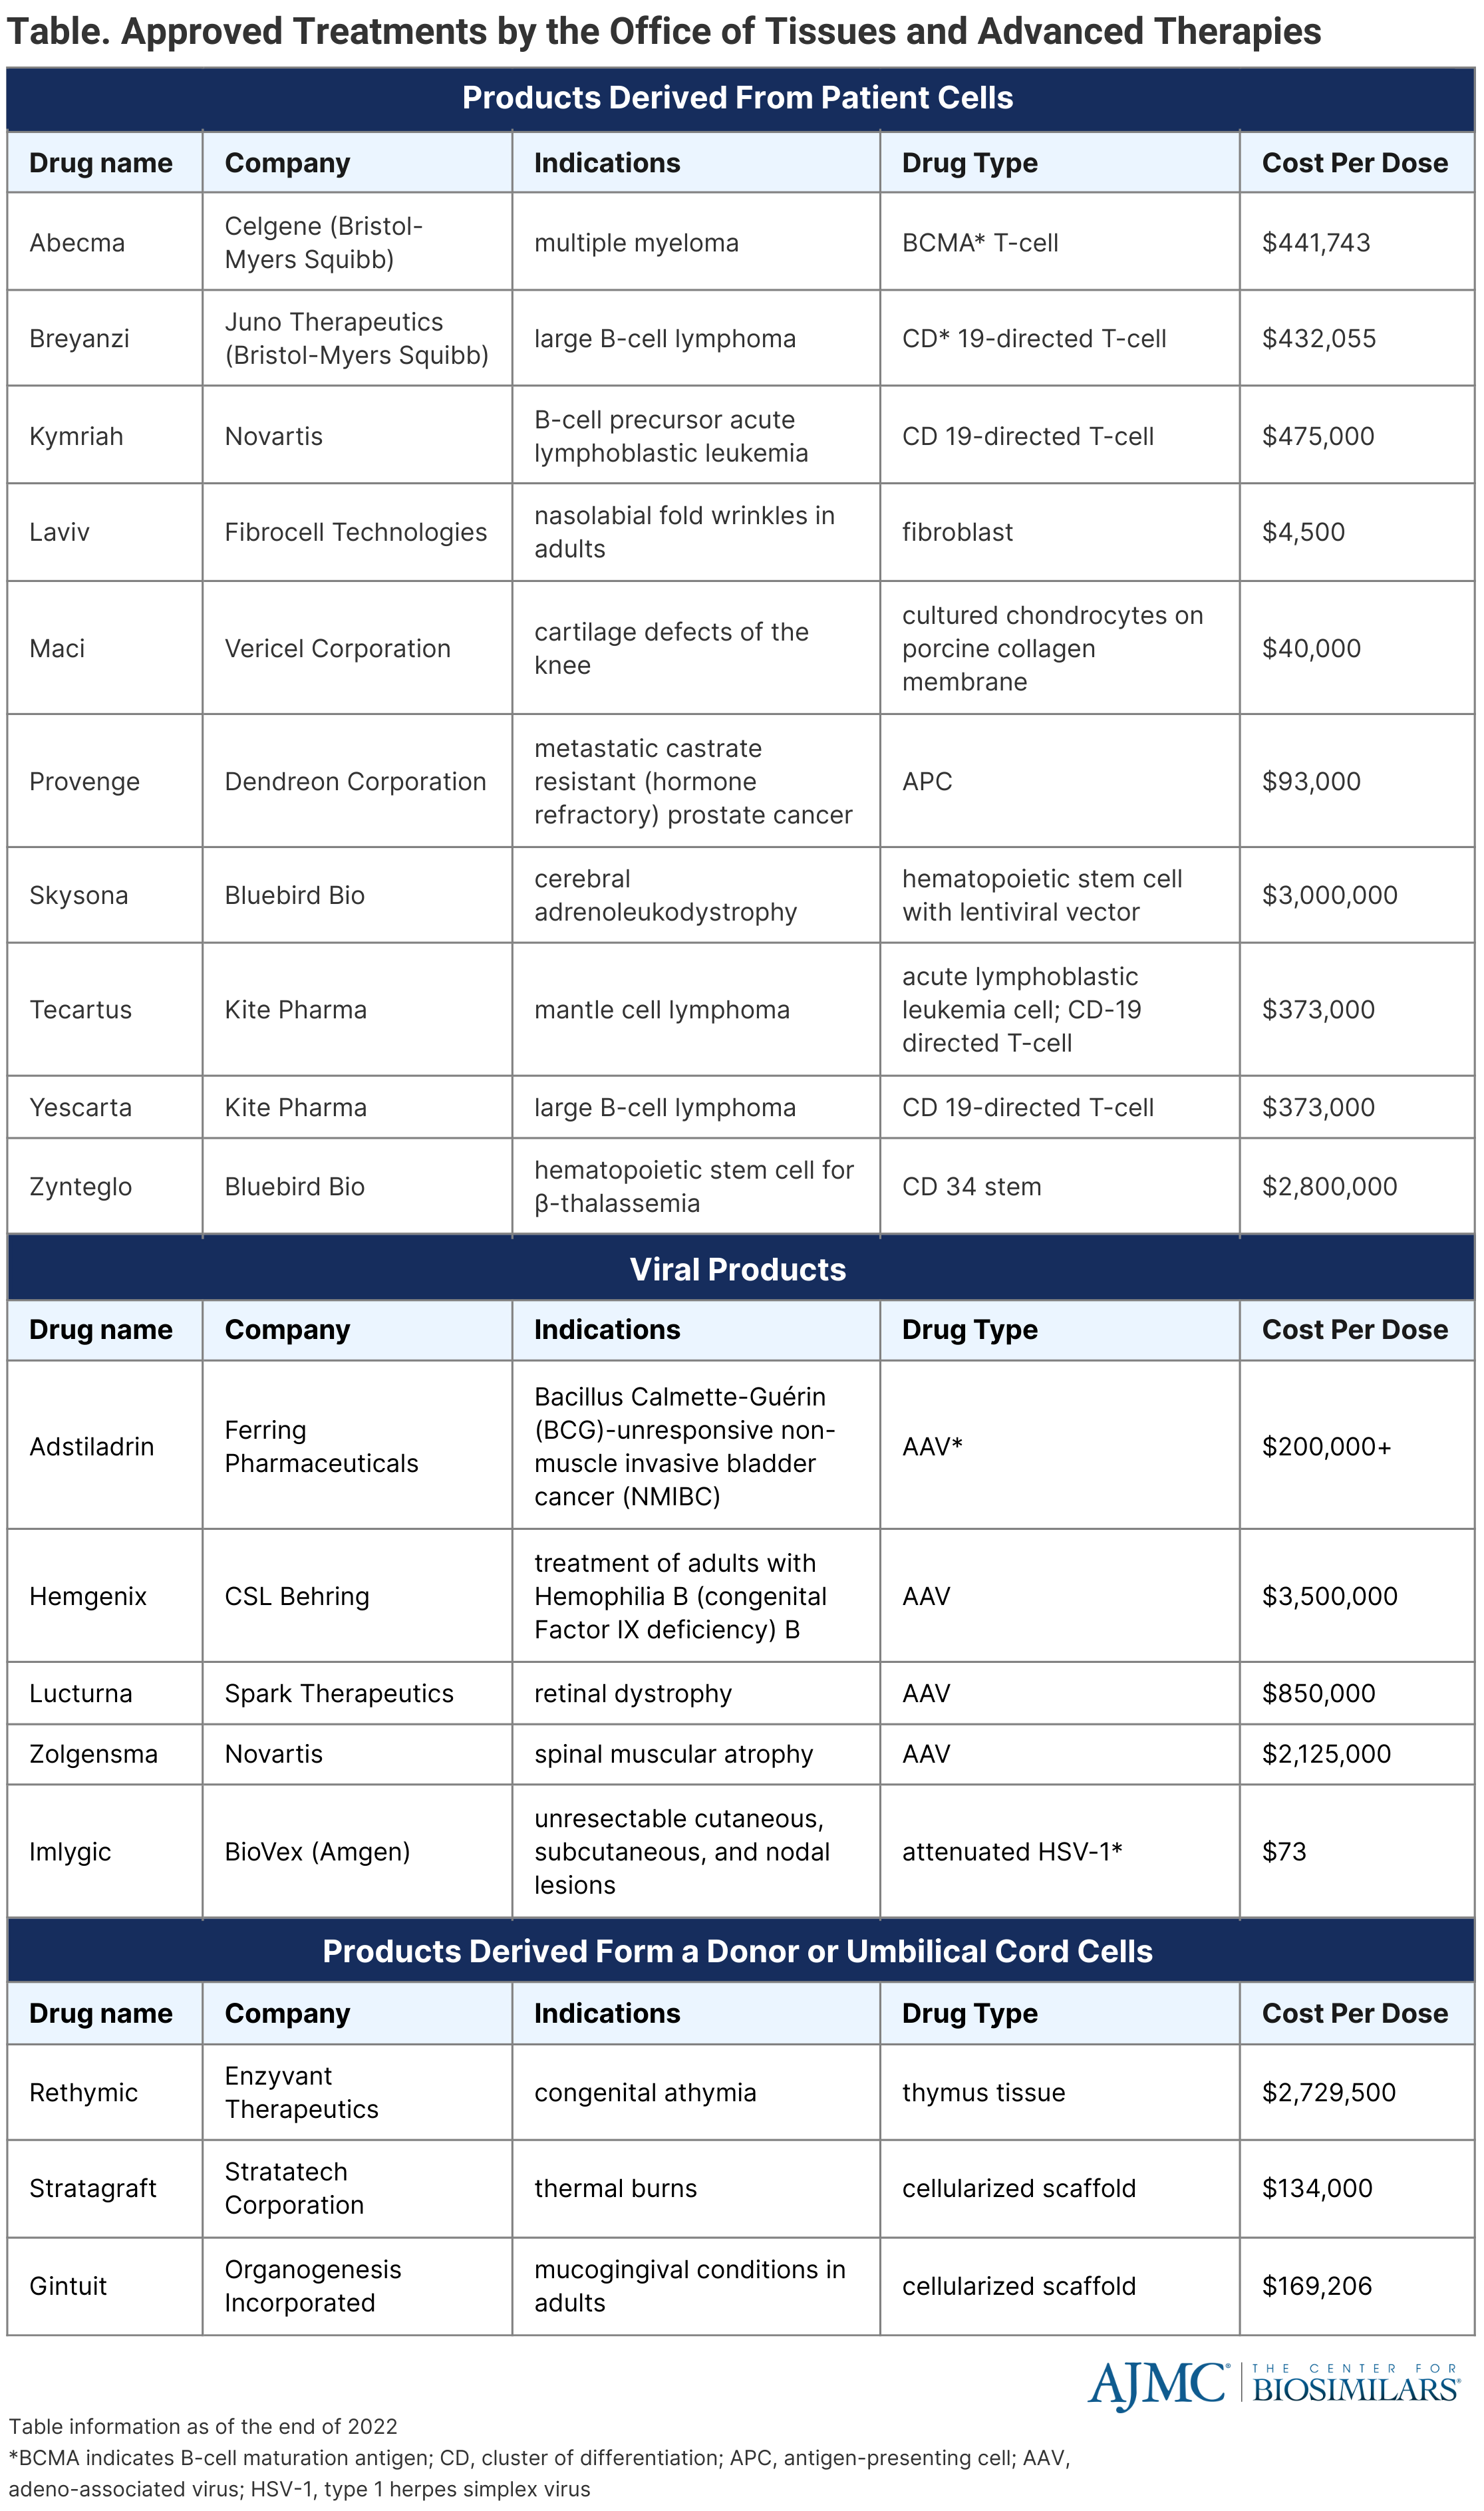 Table. Approved Treatments by the Office of Tissues and Advanced Therapies [as of the end of 2022]